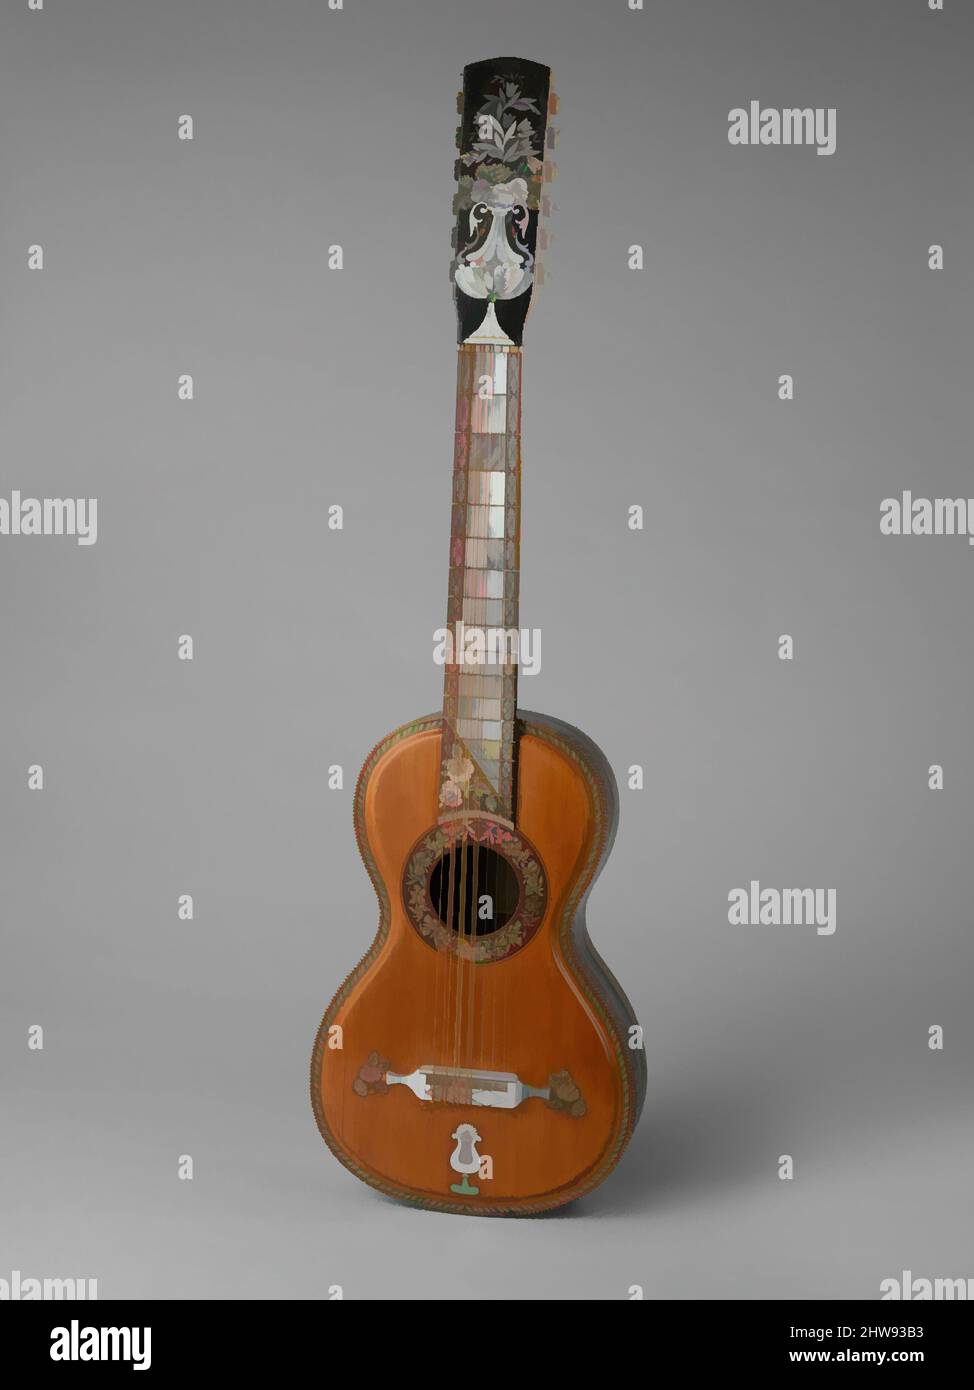 Art inspired by Guitarra septima (seven string guitar), ca. 1880, Mexico, Mexican, Spruce, rosewood, mother-of-pearl, Height: 51 3/8 in. (130.5 cm), Chordophone-Lute-plucked-fretted, M. Fernandez (Mexican), Mariano Fernández, Guitarra Séptima (Seven-course guitar) The Mexican seven-, Classic works modernized by Artotop with a splash of modernity. Shapes, color and value, eye-catching visual impact on art. Emotions through freedom of artworks in a contemporary way. A timeless message pursuing a wildly creative new direction. Artists turning to the digital medium and creating the Artotop NFT Stock Photo